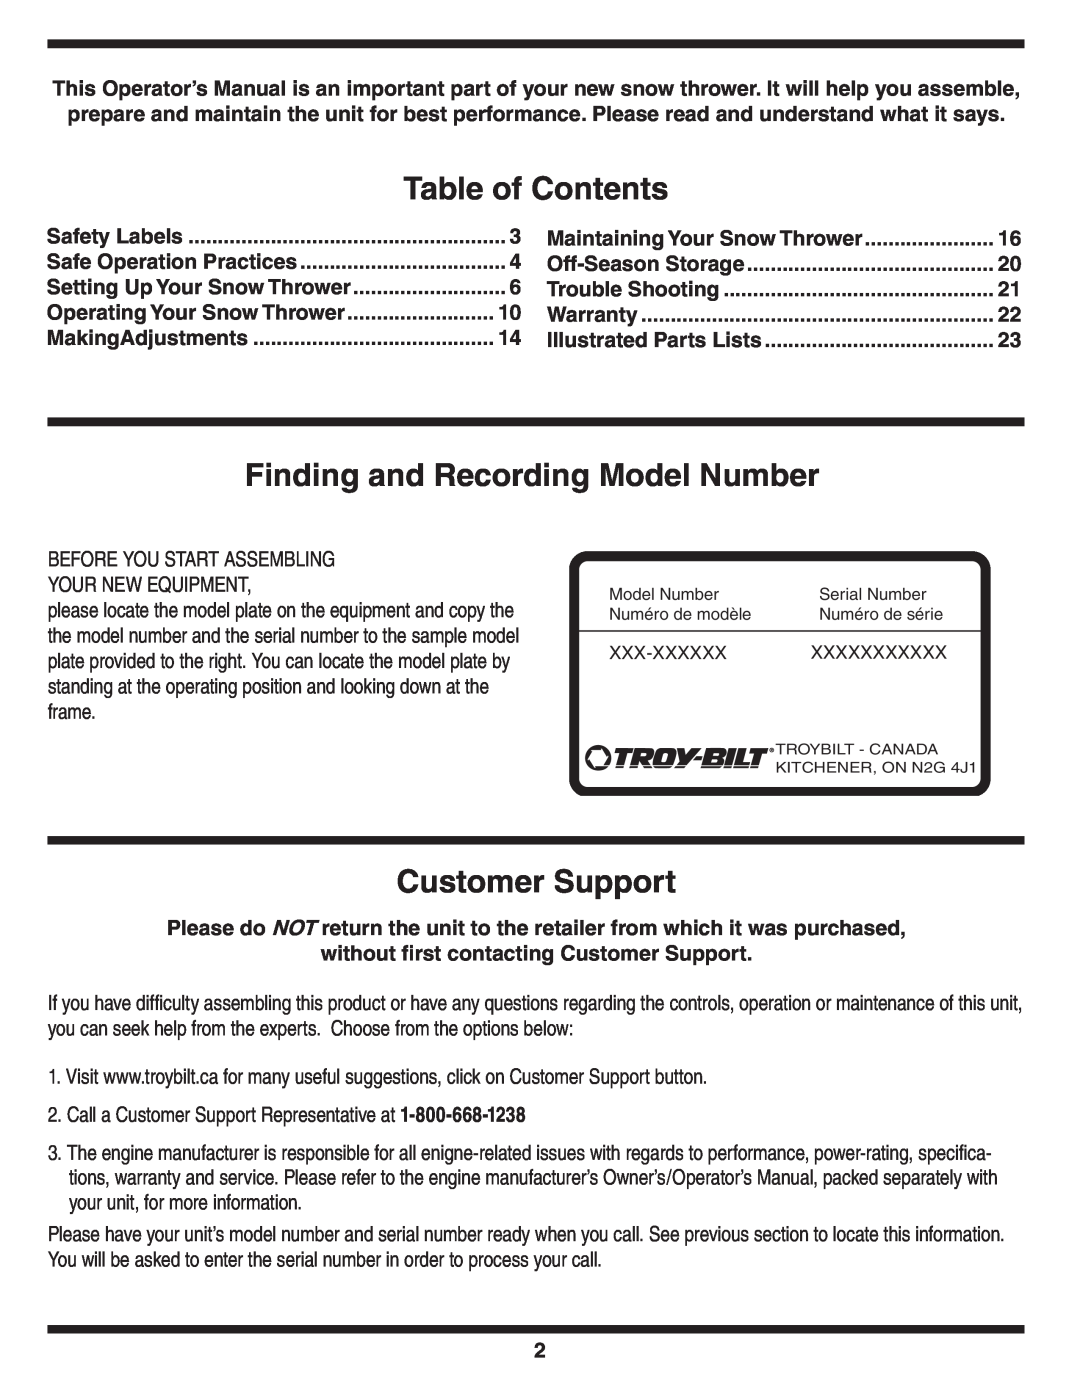 Troy-Bilt 772C0772 warranty Table of Contents, Finding and Recording Model Number, Customer Support 